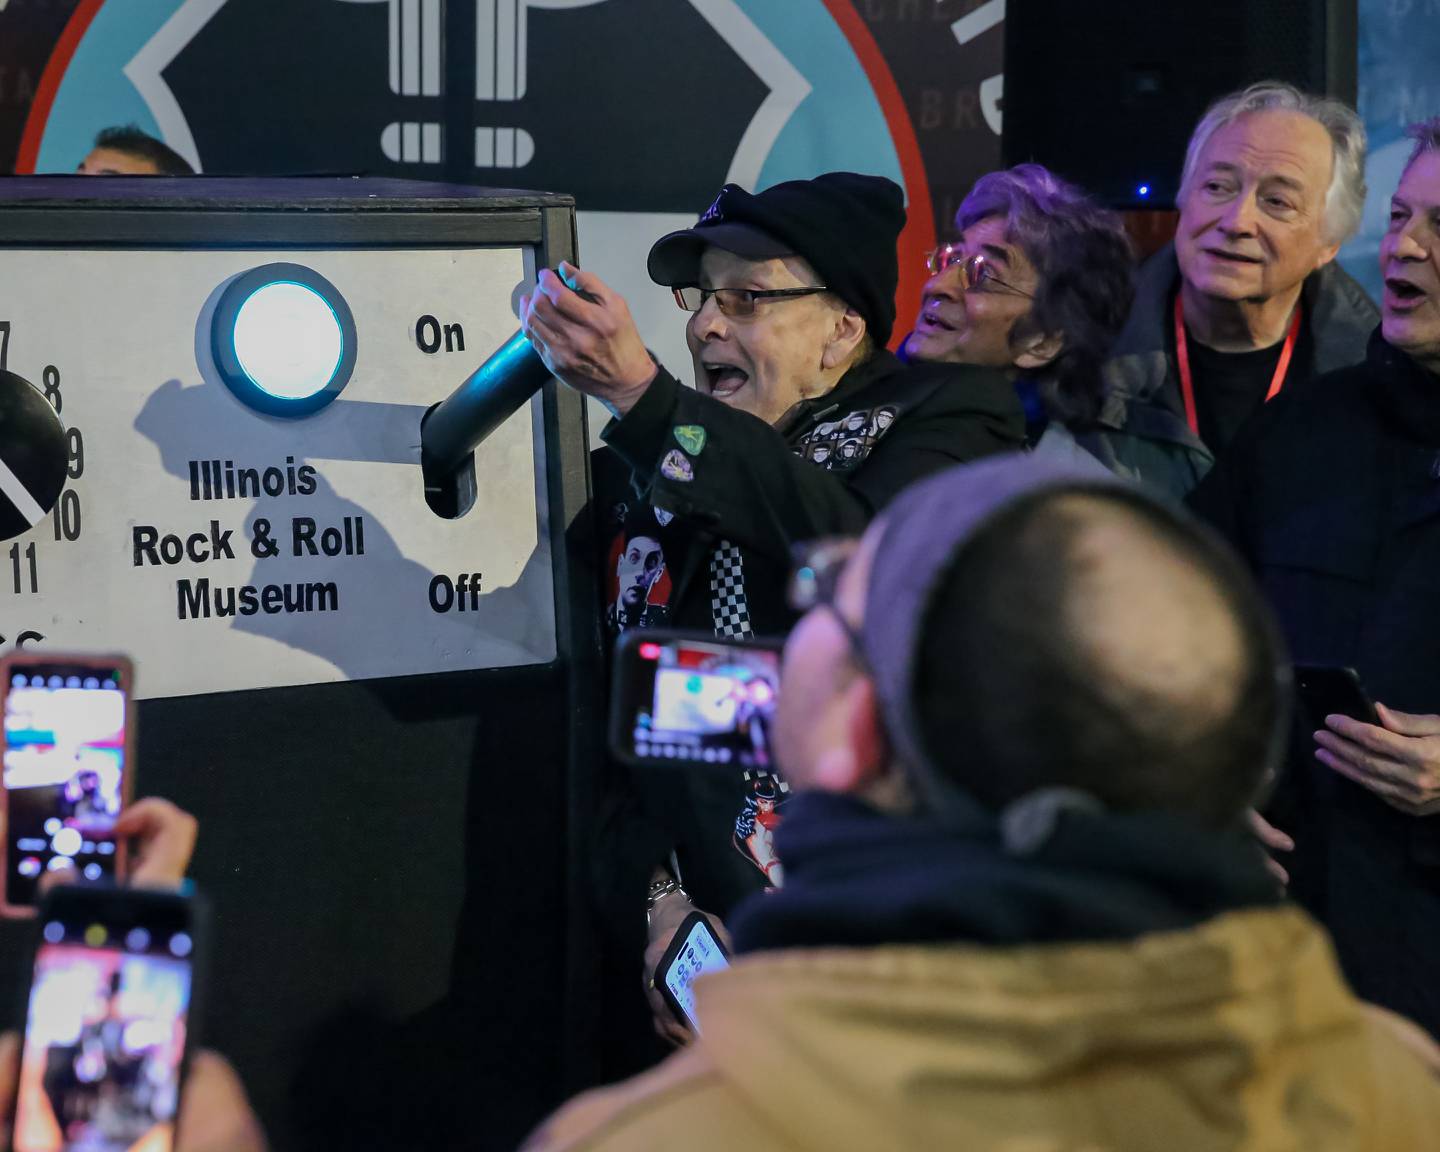 Rick Nielsen of Cheap Trick lights GIGANTAR during the celebratory lighting ceremony at the Illinois Rock and Roll museum.  Jan 20, 2023.